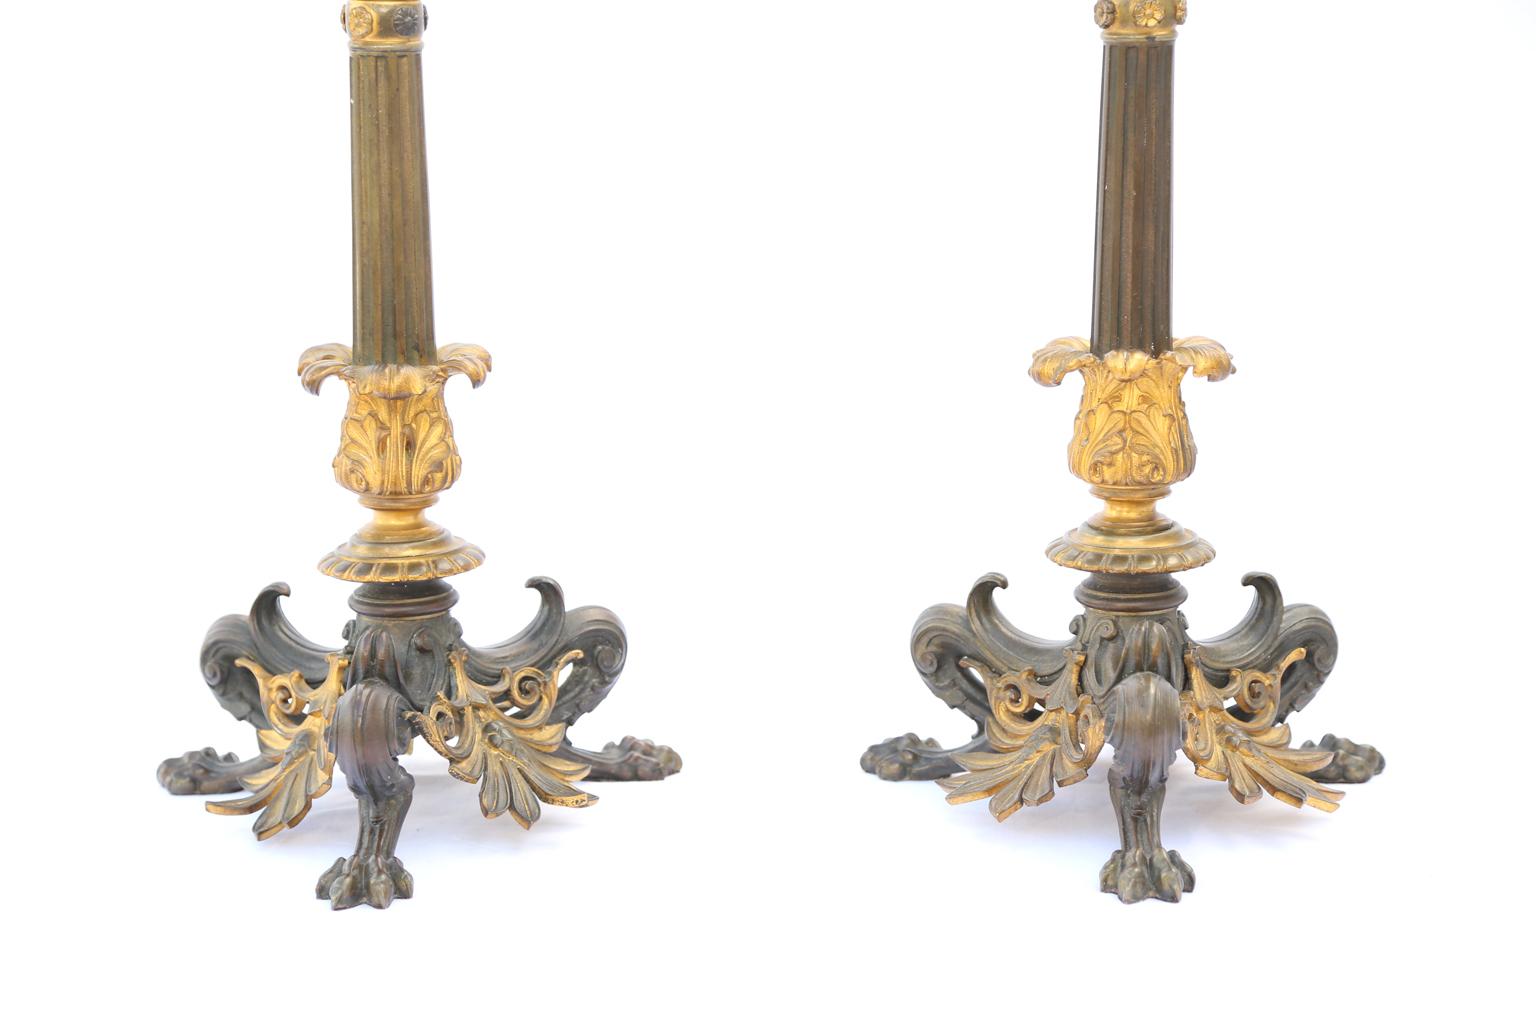 Pair of Regency Patinated Bronze and Ormolu Candelabra Lamps For Sale 2